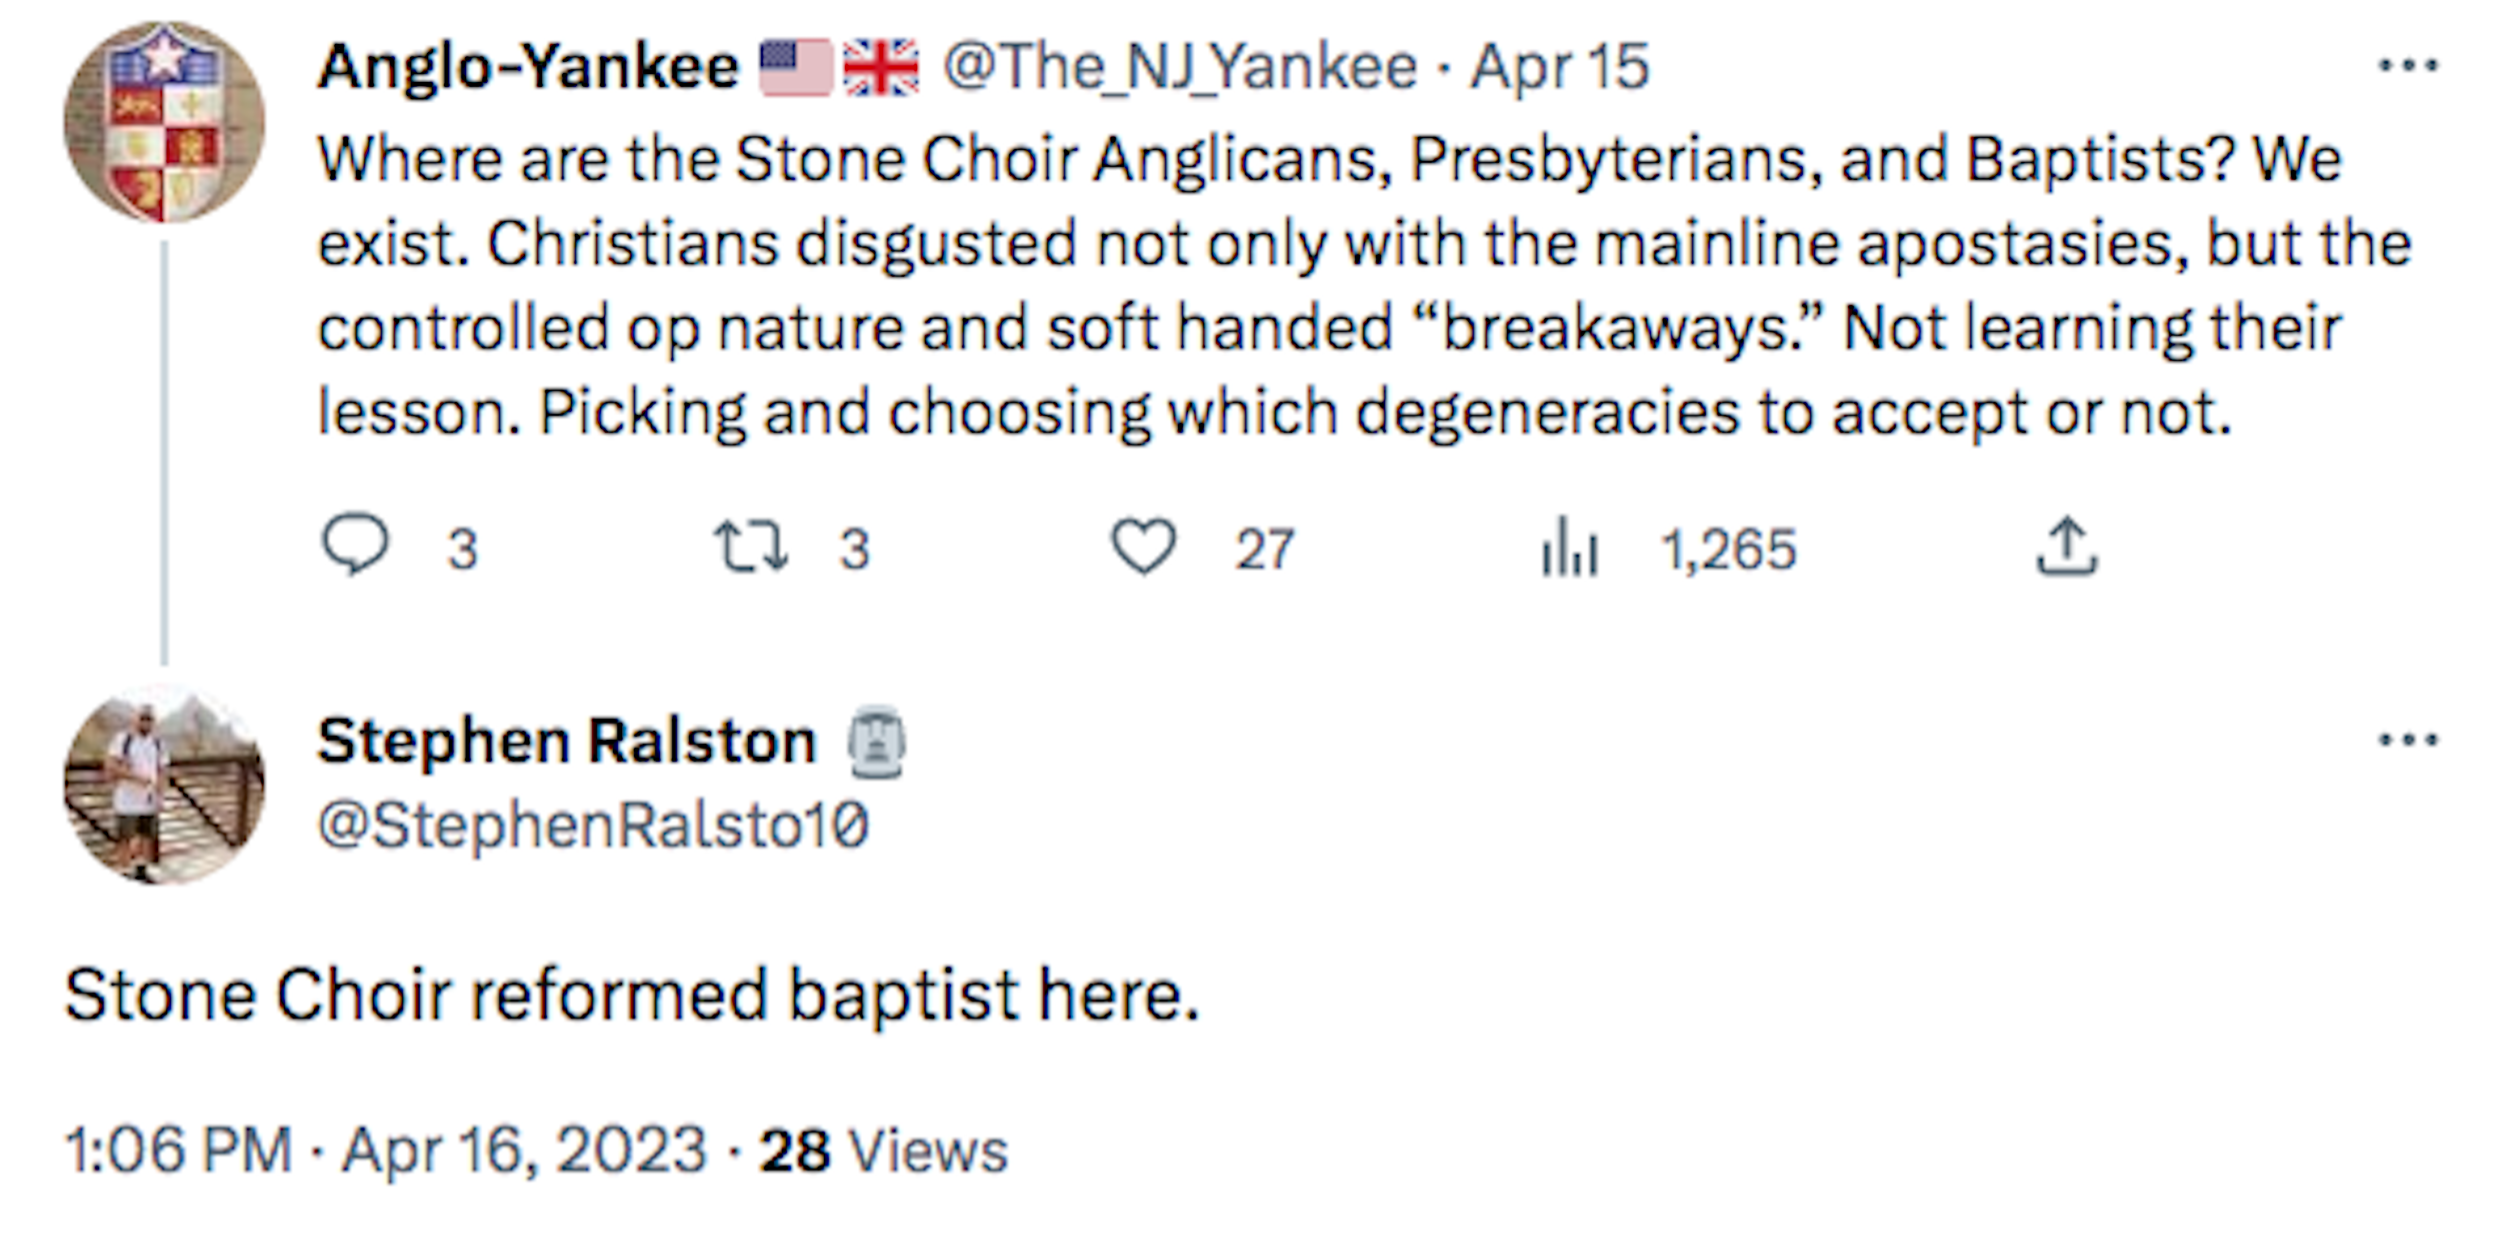 User "Anglo-Yankee": "Where are the Stone Choir Anglicans, Presbyterians, and Baptists? We exist. Christians disgusted not only with the mainline apostasies, but the controlled op nature and softhanded 'breakaways.' Not learning their lesson. Picking and choosing which degeneracies to accept or not." Reply from "Stephen Ralston": "Stone Choir reformed baptist here."